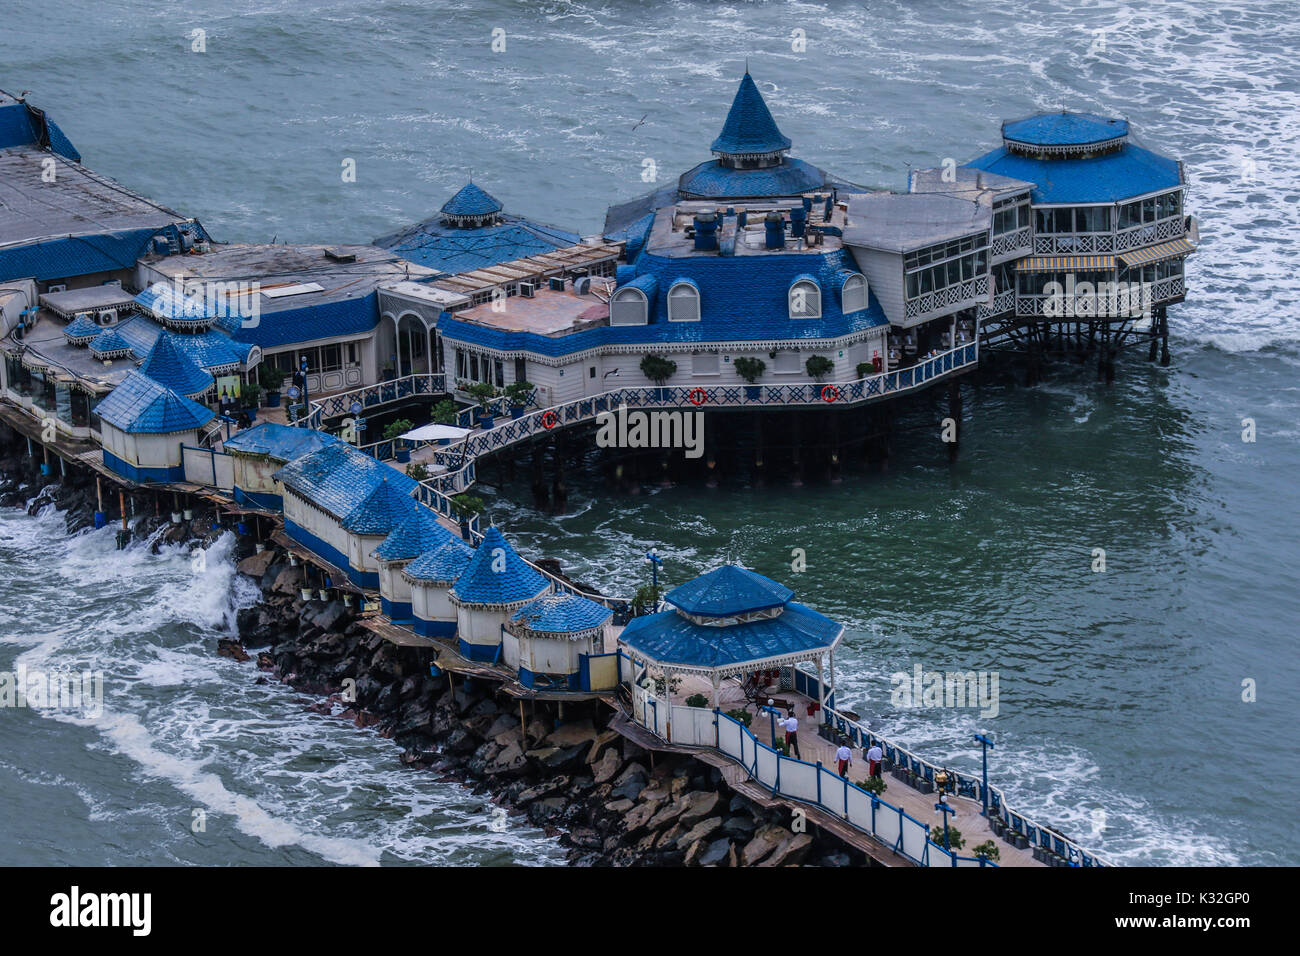 Surf, lookout and dock of the Waikiki beach of the tourist area of Miraflores in the capital city of Lima in Peru. Surfers, waves, sea, ocean open sea Stock Photo